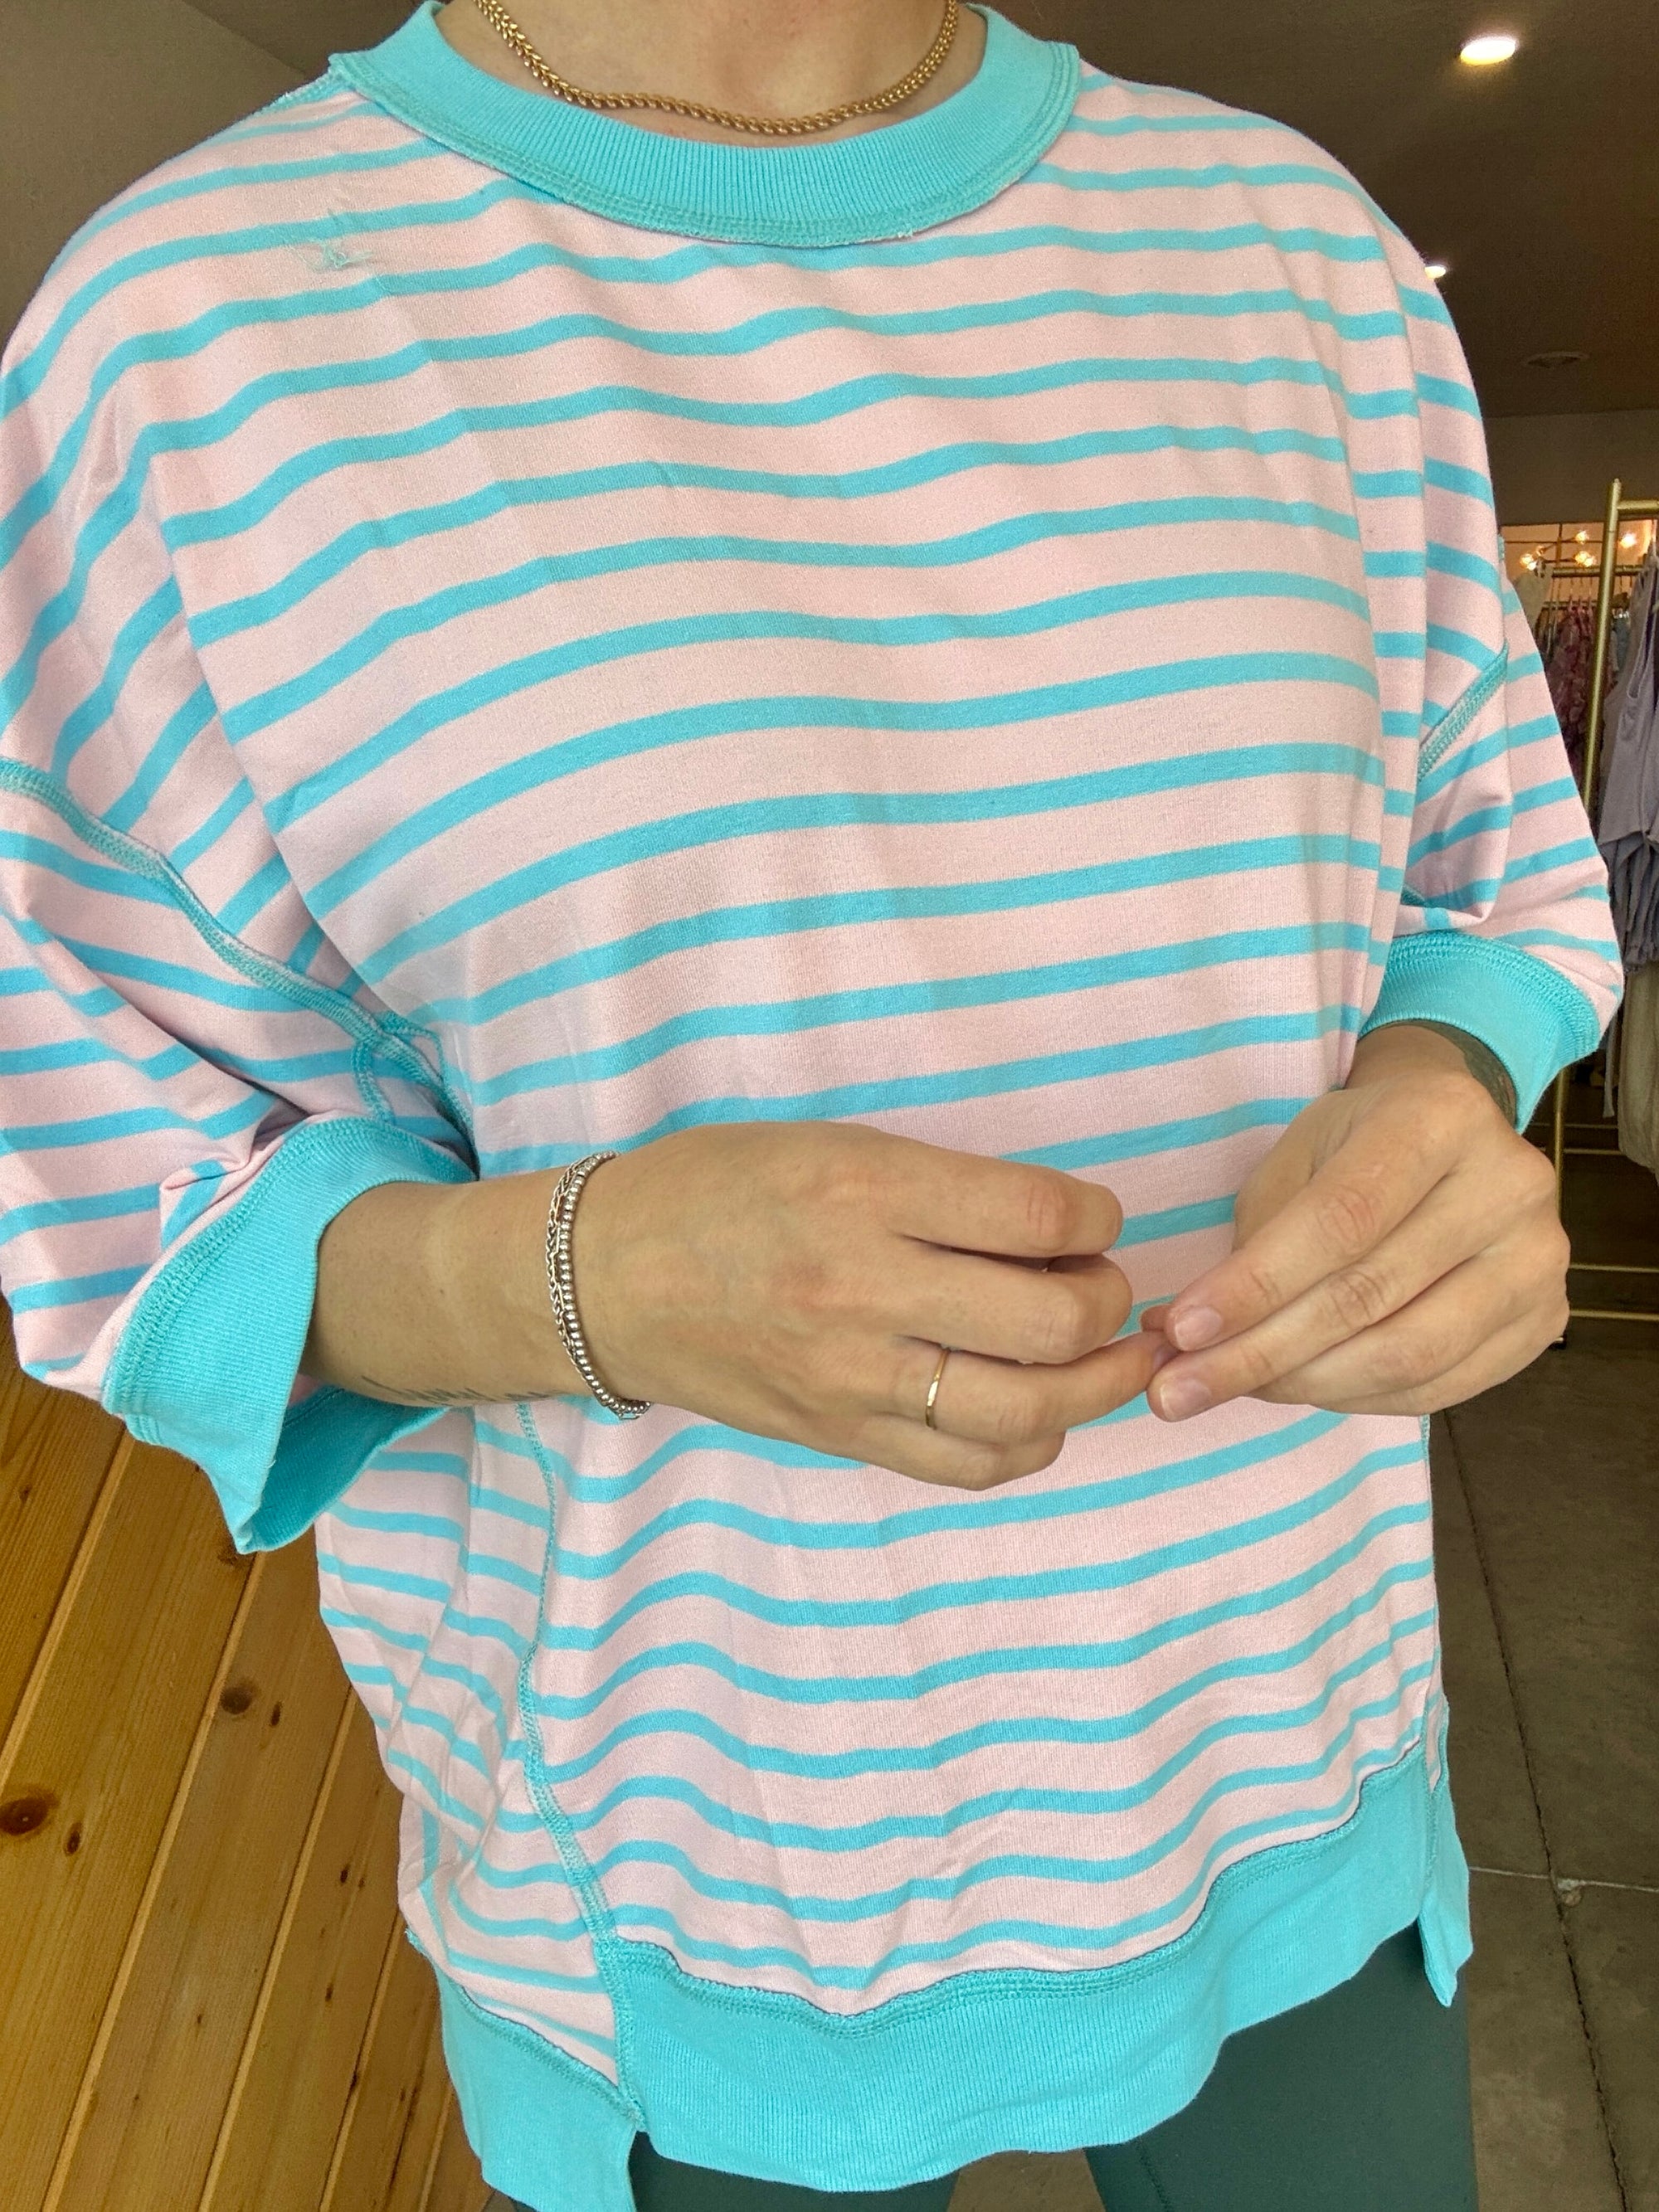 Blue & Pink Striped Top